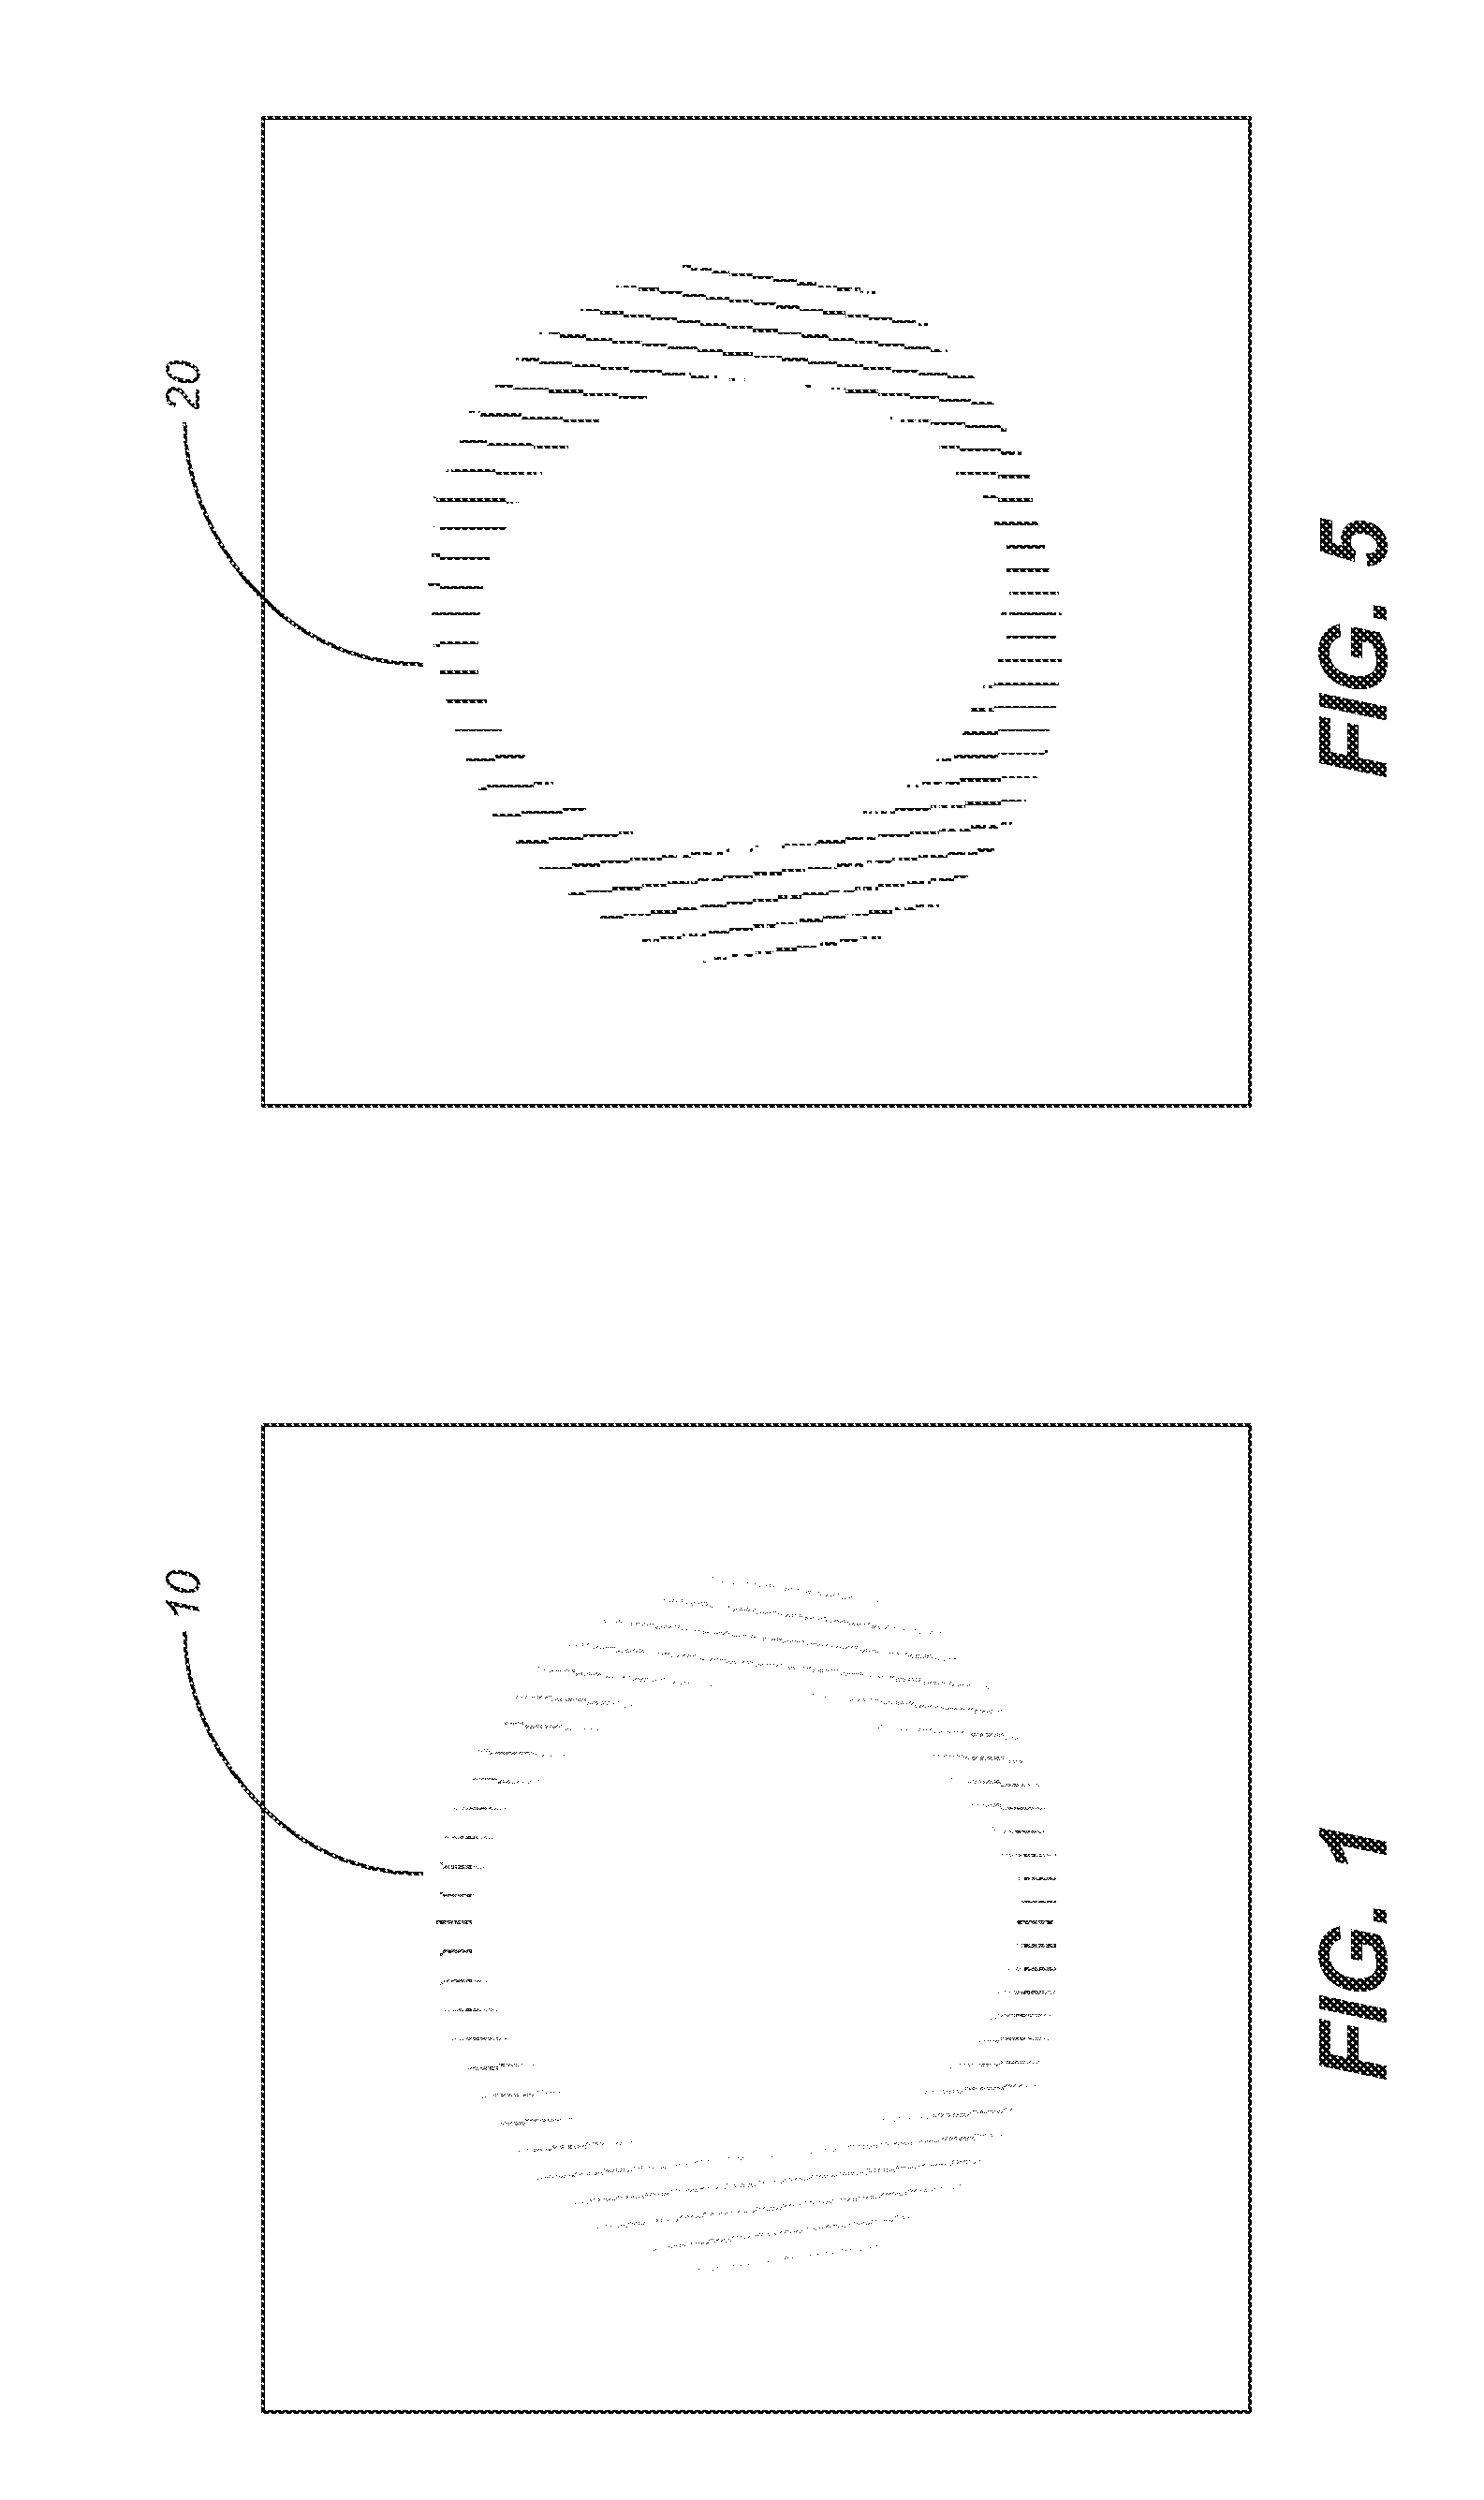 Method and apparatus to produce ultrasonic images using multiple apertures